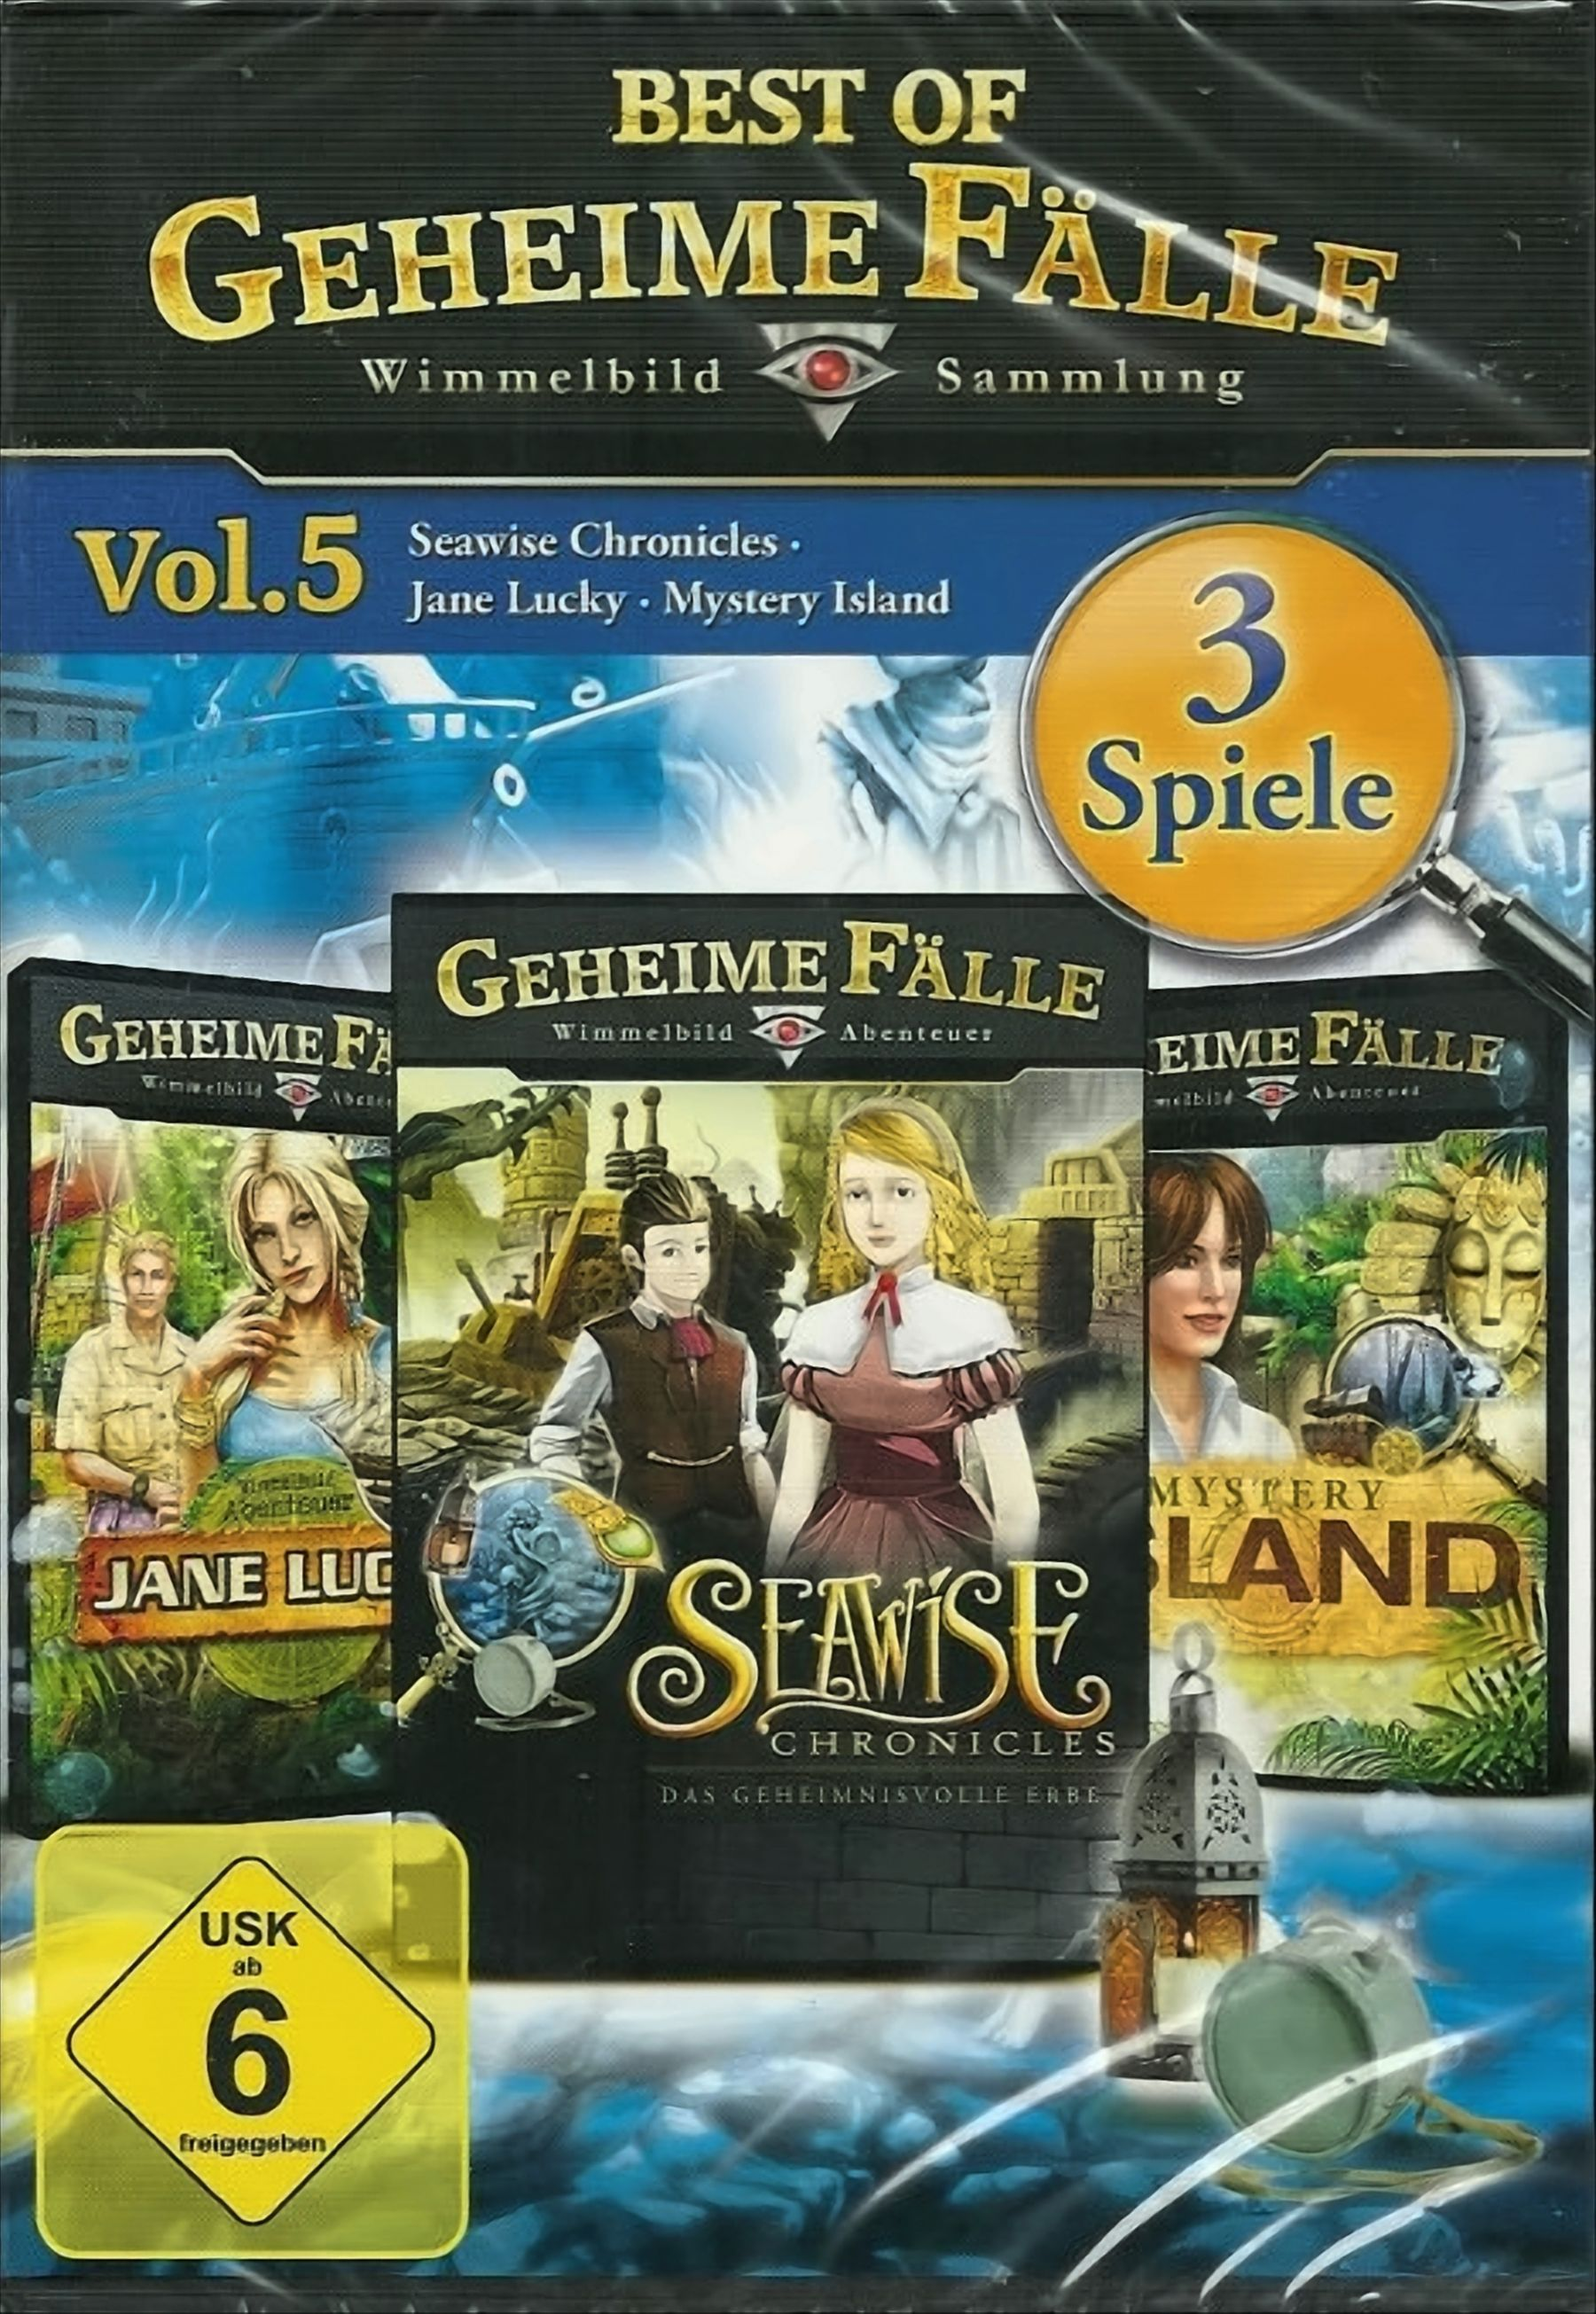 - Fälle 5 OF BEST Geheime Vol. [PC]